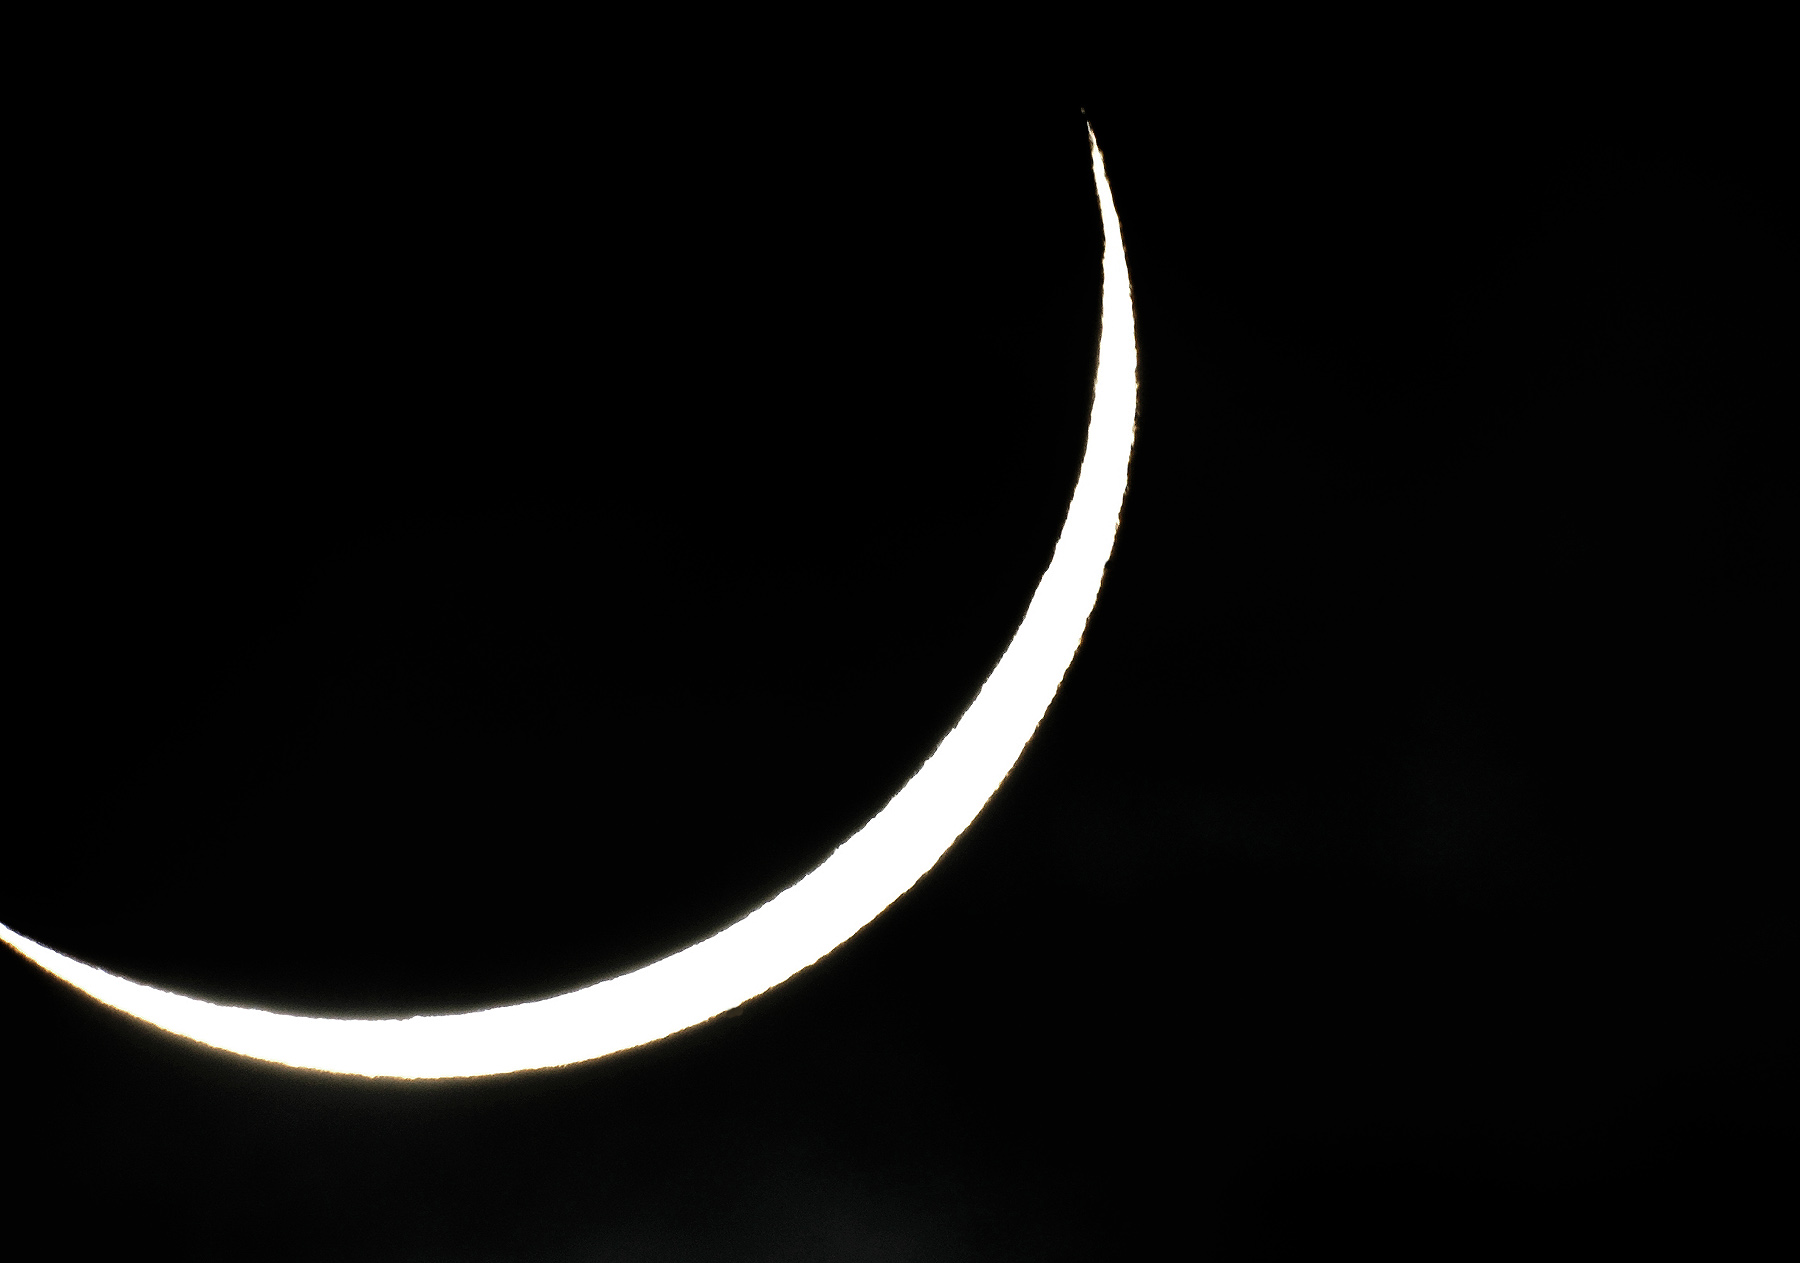 Eclipse 2012 - A85 - Ingoing Partial 95pc